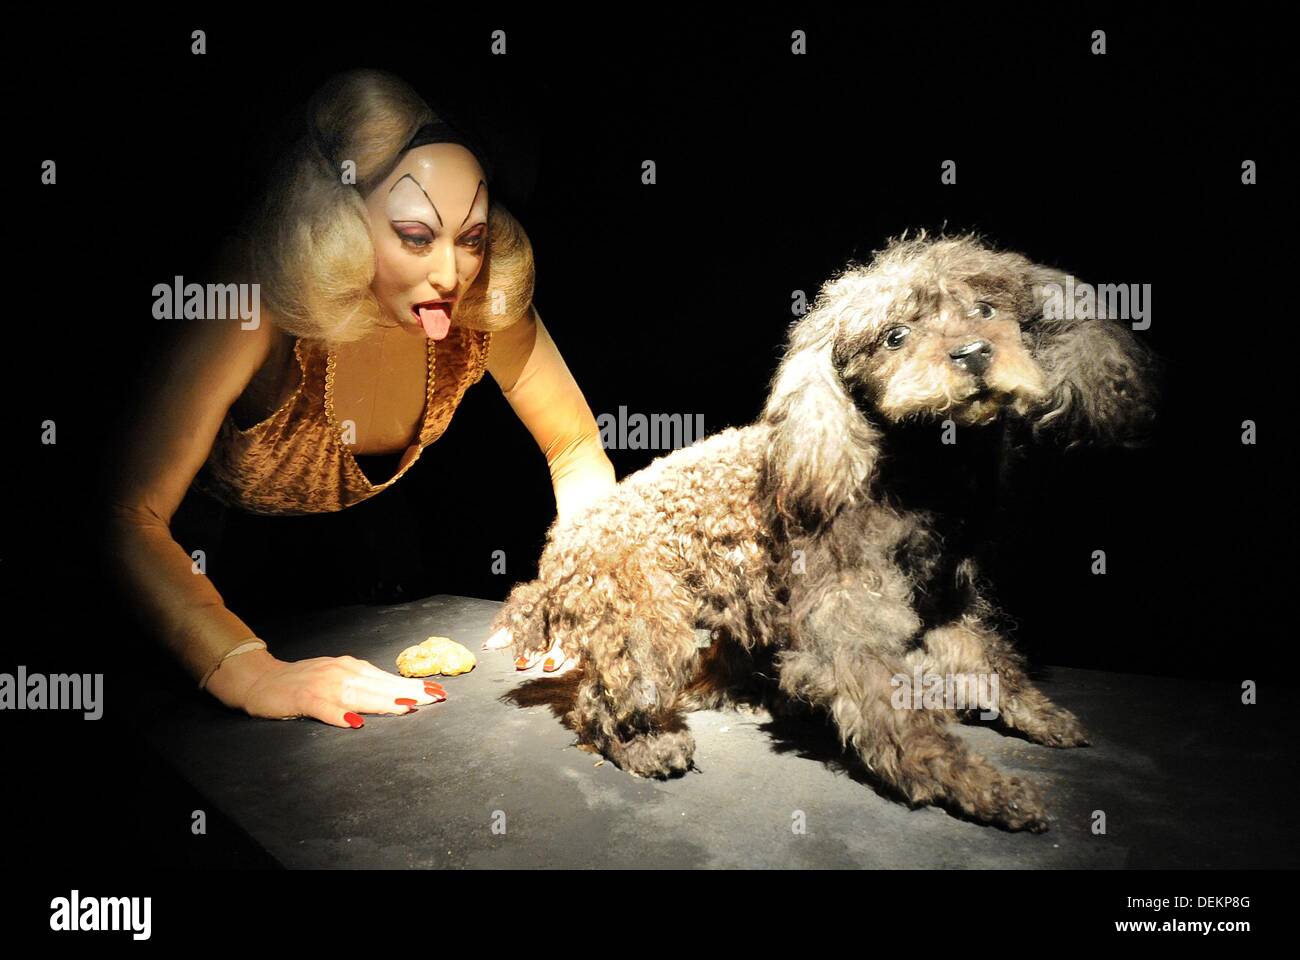 The installation 'Woman with Dog' part of the art installation 'The House of Horrors' at the Sprengel Museum in Hanover, Germany, 20 September 2013. American conceptual artist Elaine Sturtevant has won the Kurt-Schwitters-Preis with the installation. Photo: HOLGER HOLLEMANN Stock Photo